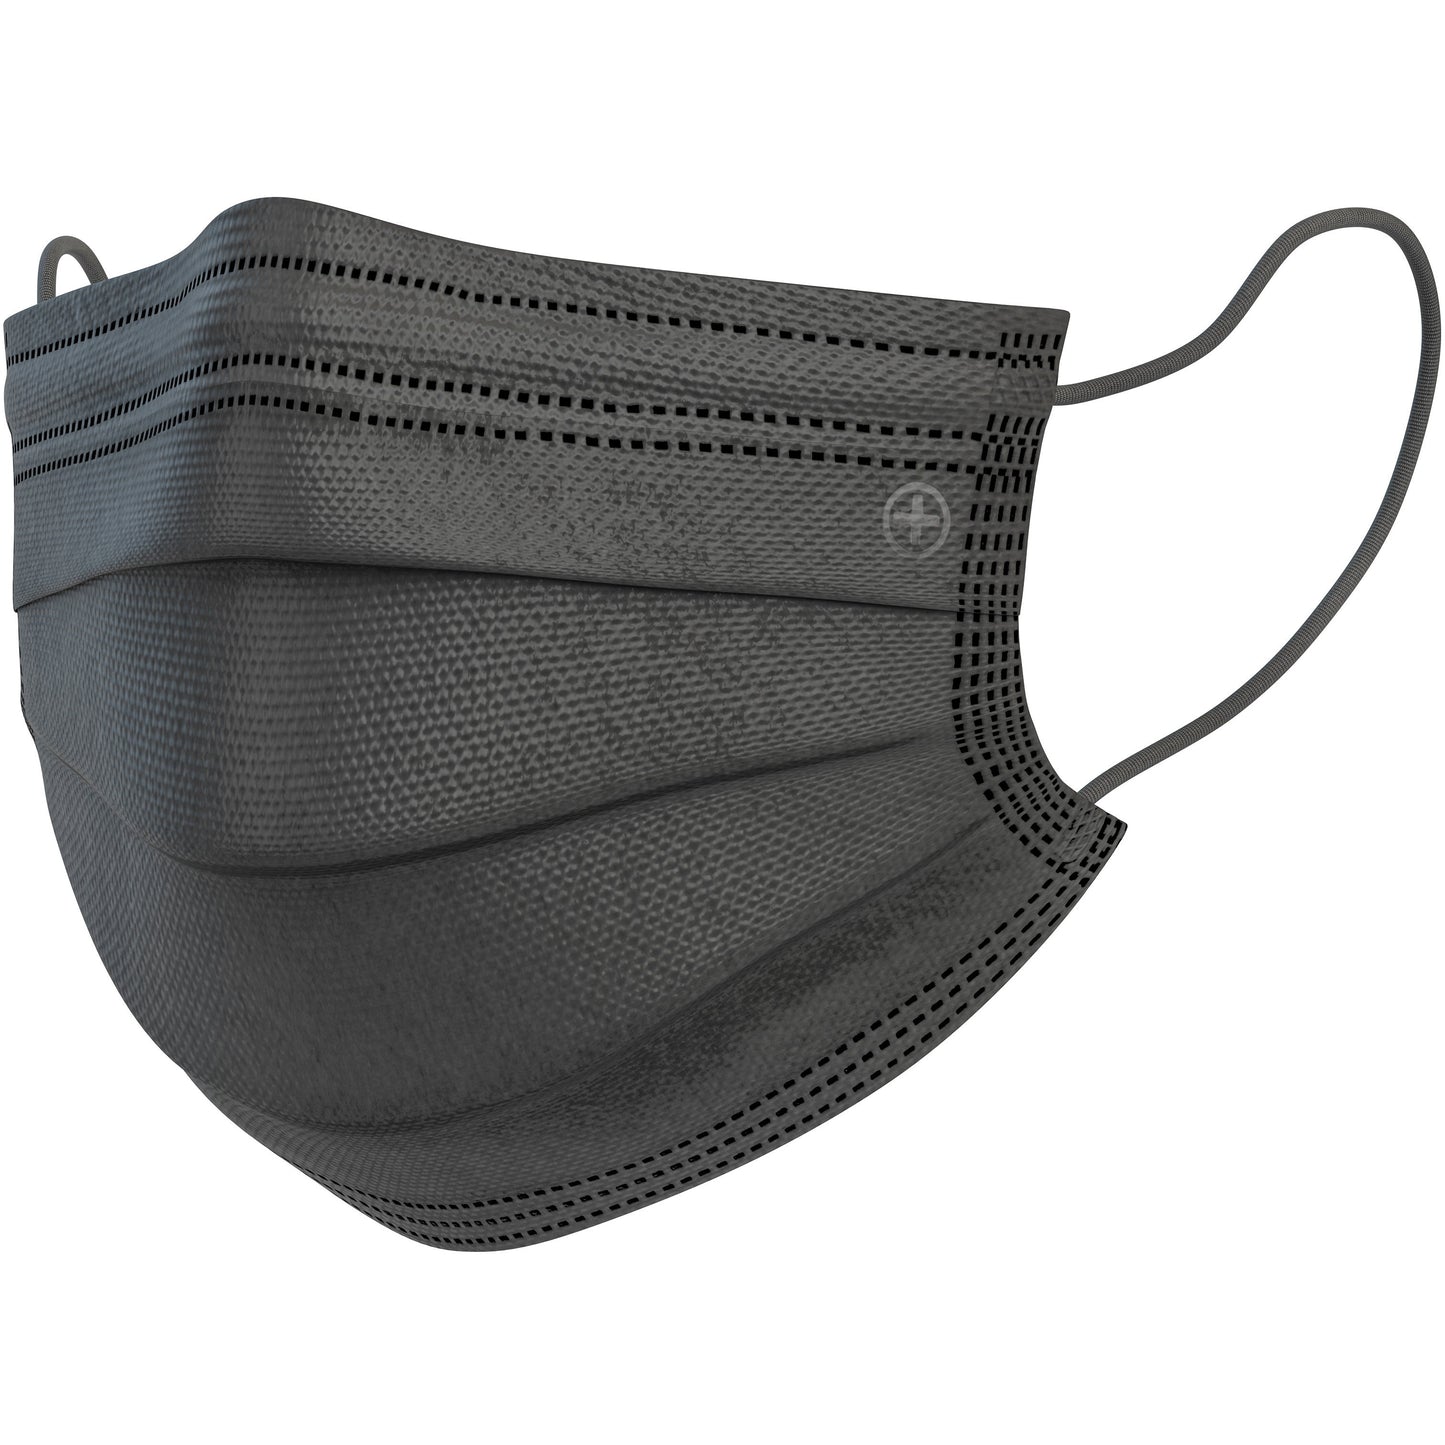 4Ply ASTM Level 2 Surgical Mask - Black